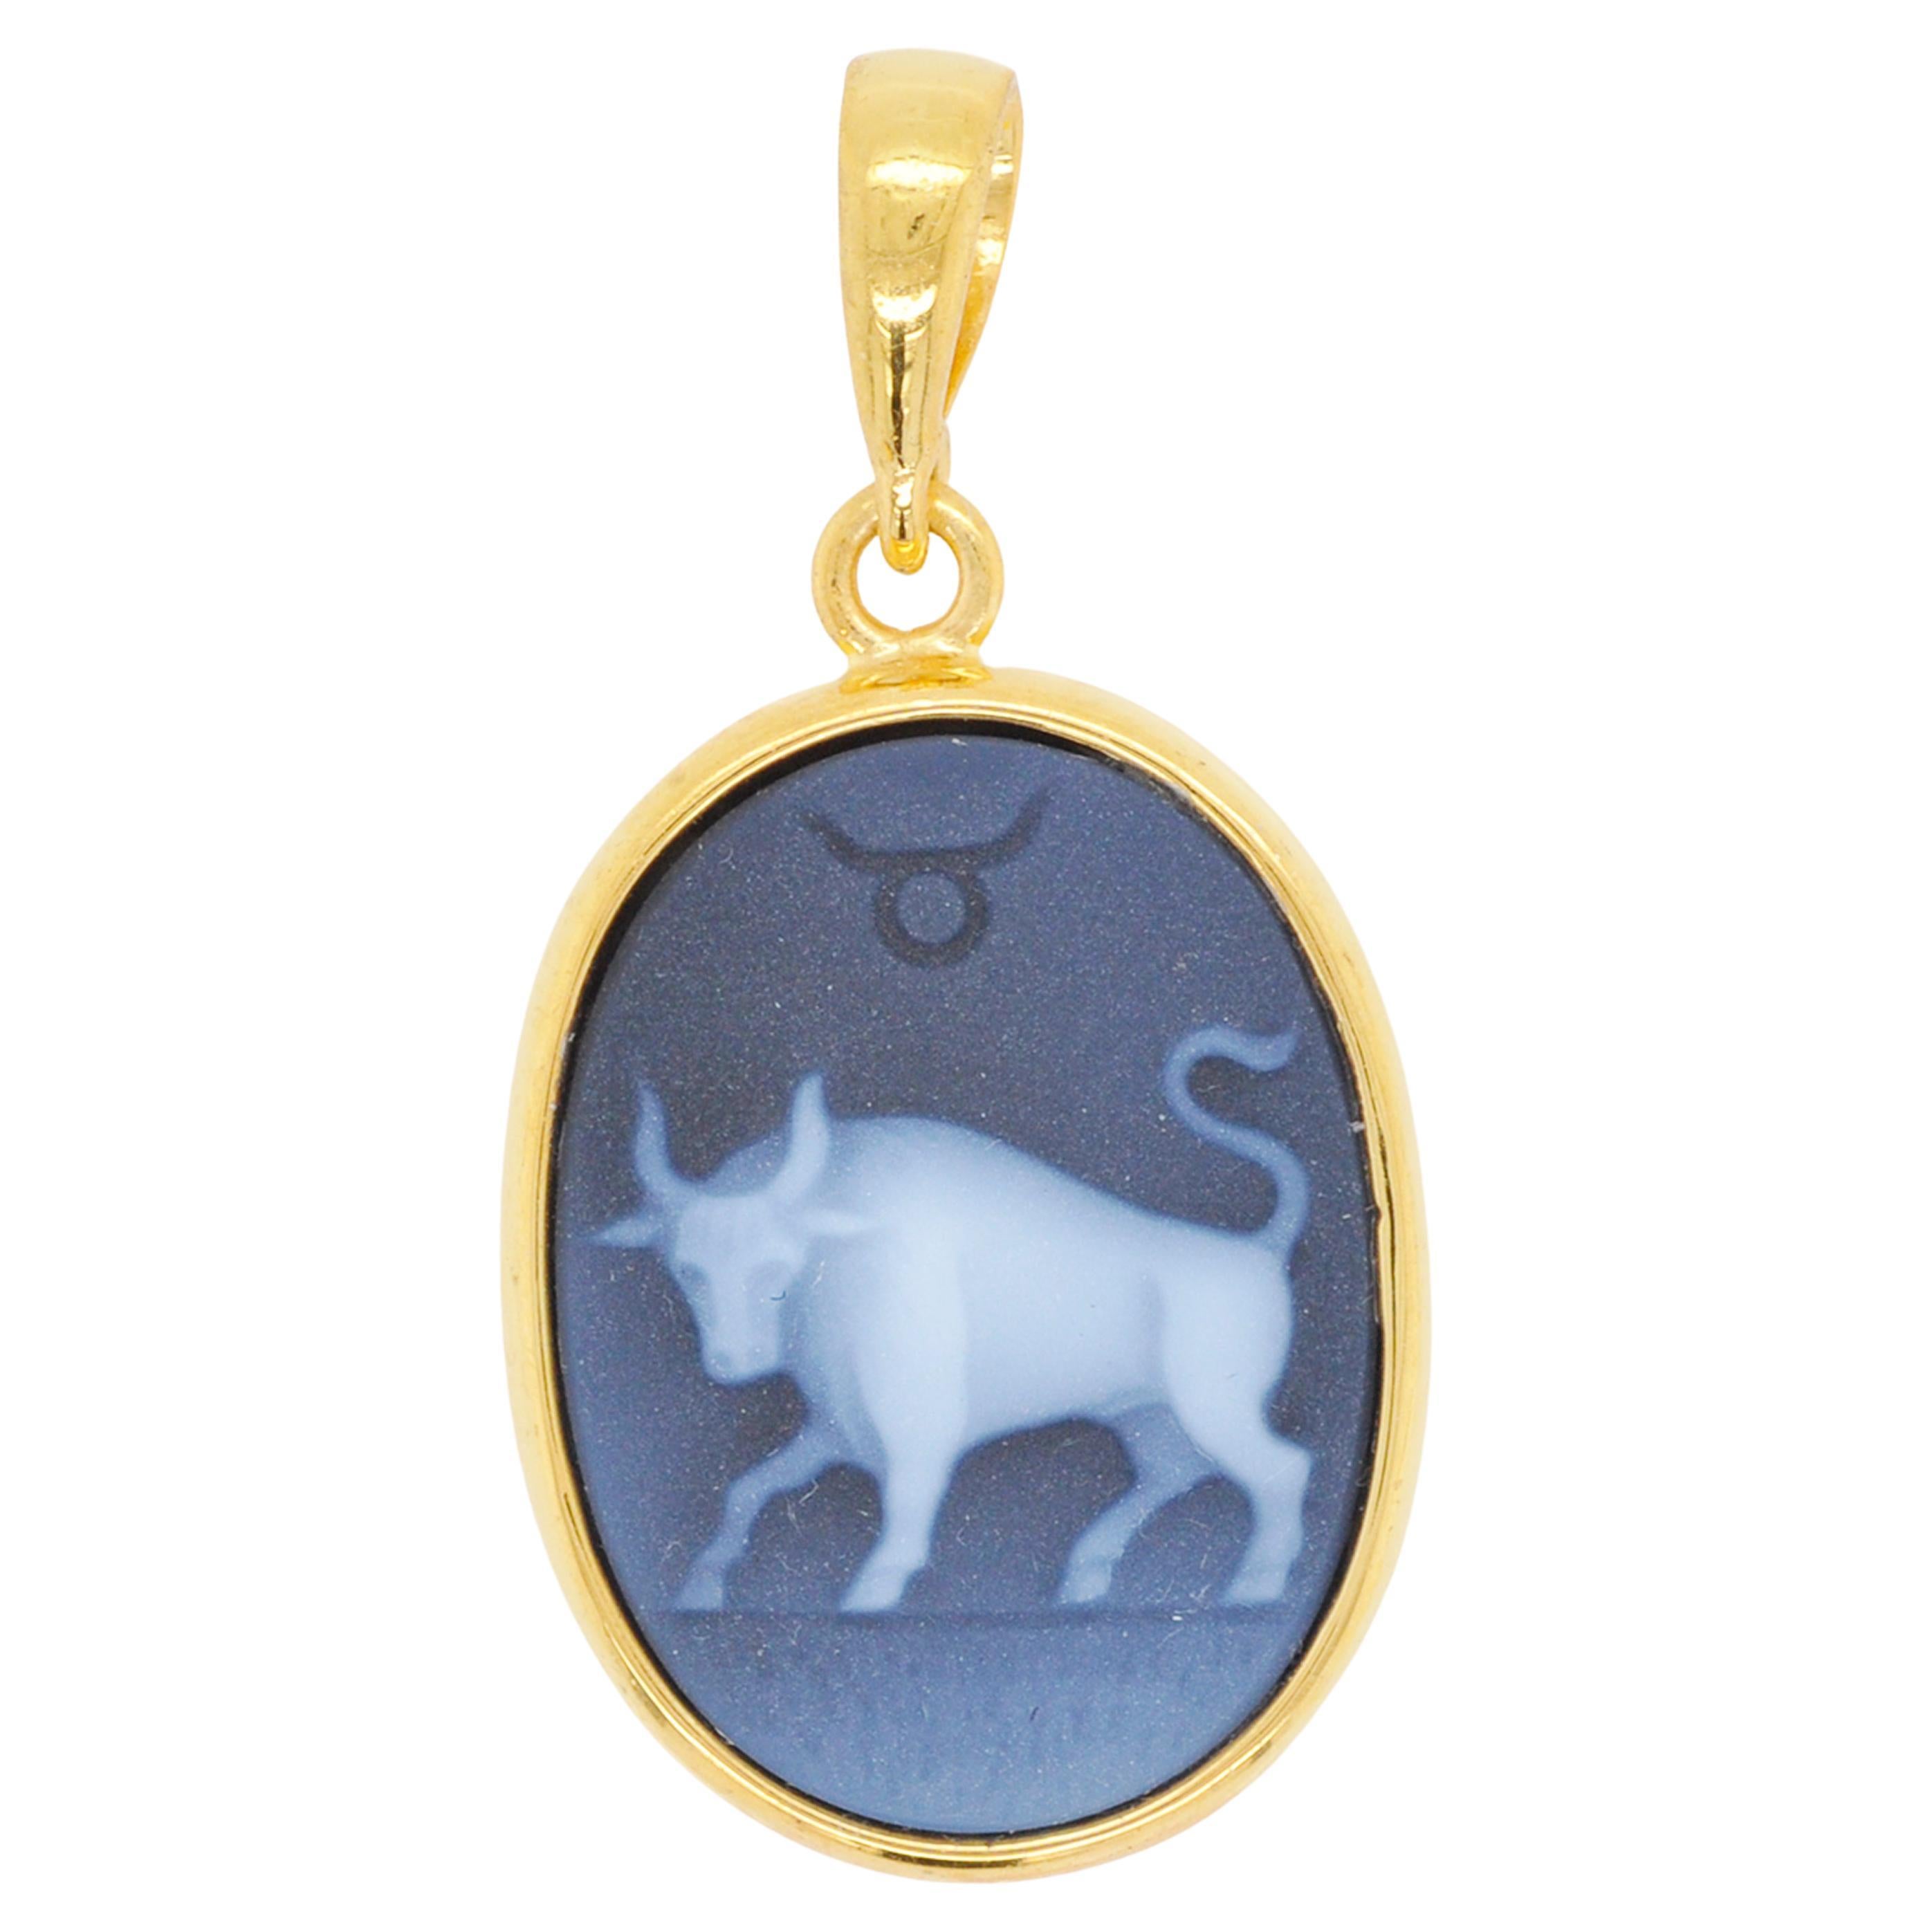 Hand-Carved Taurus Zodiac Agate Cameo 925 Sterling Silver Pendant Necklace